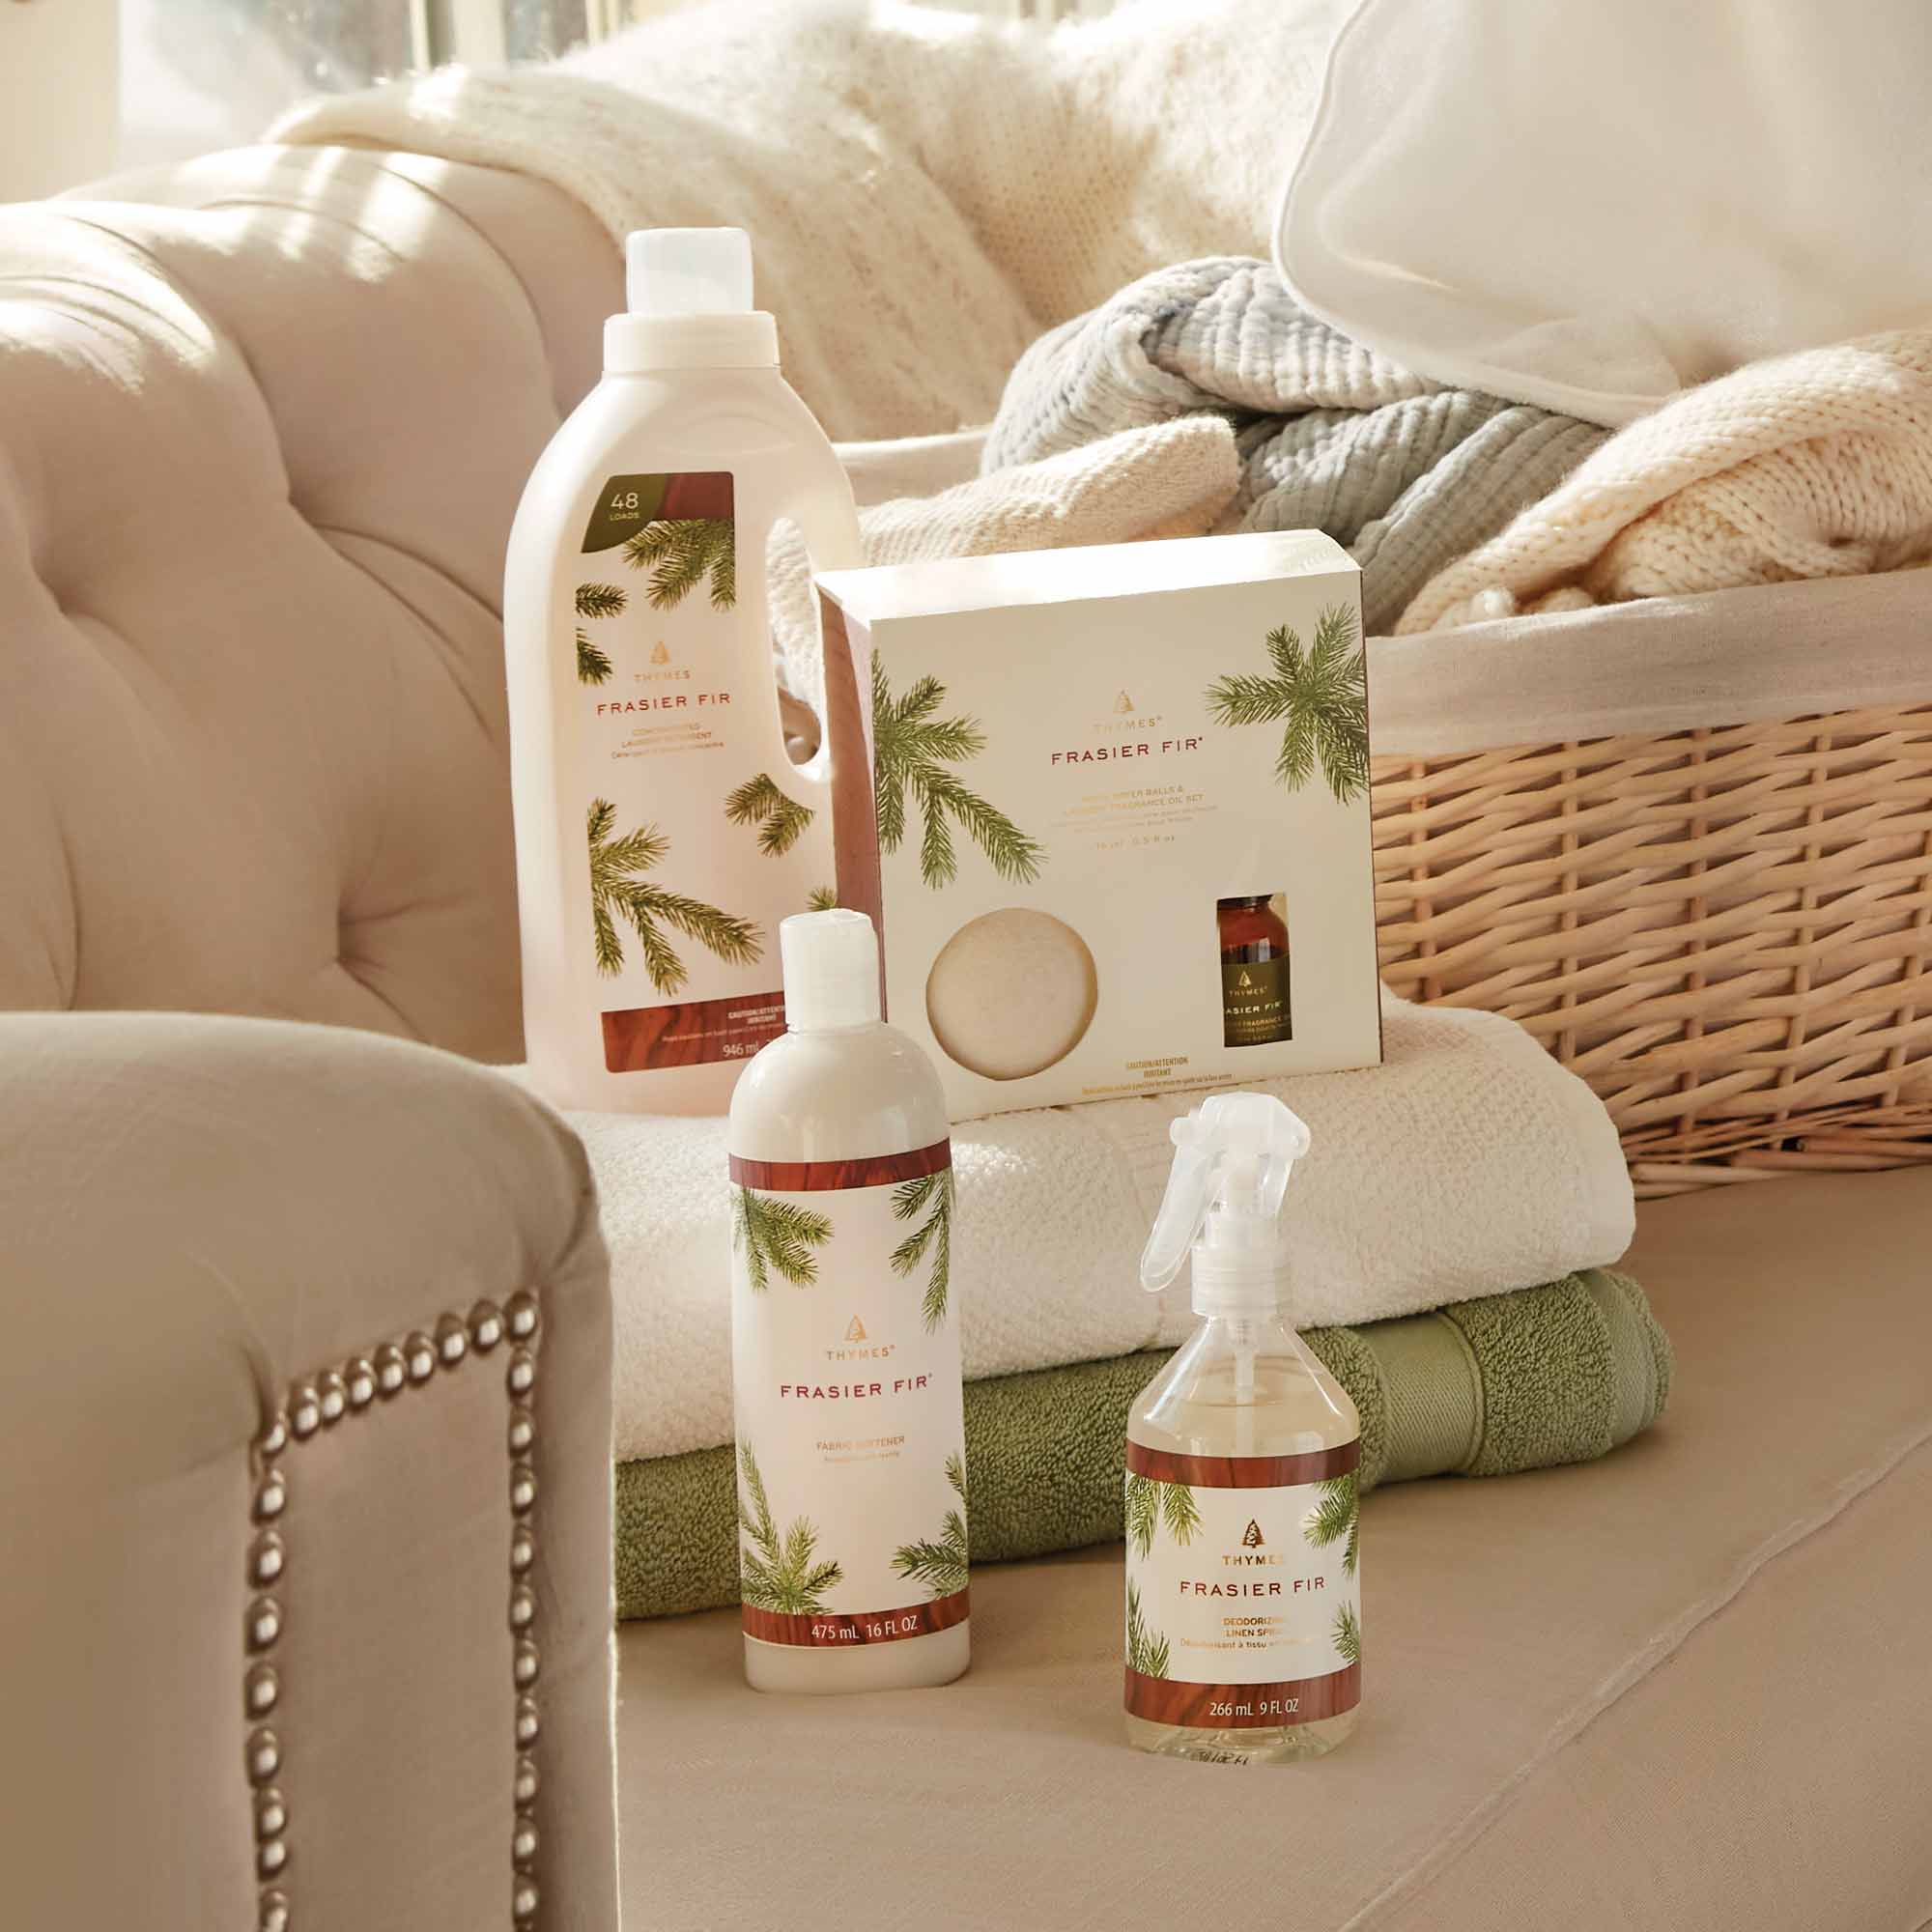 Thymes - Washed Linen Wool Dryer Balls & Laundry Fragrance Oil Set